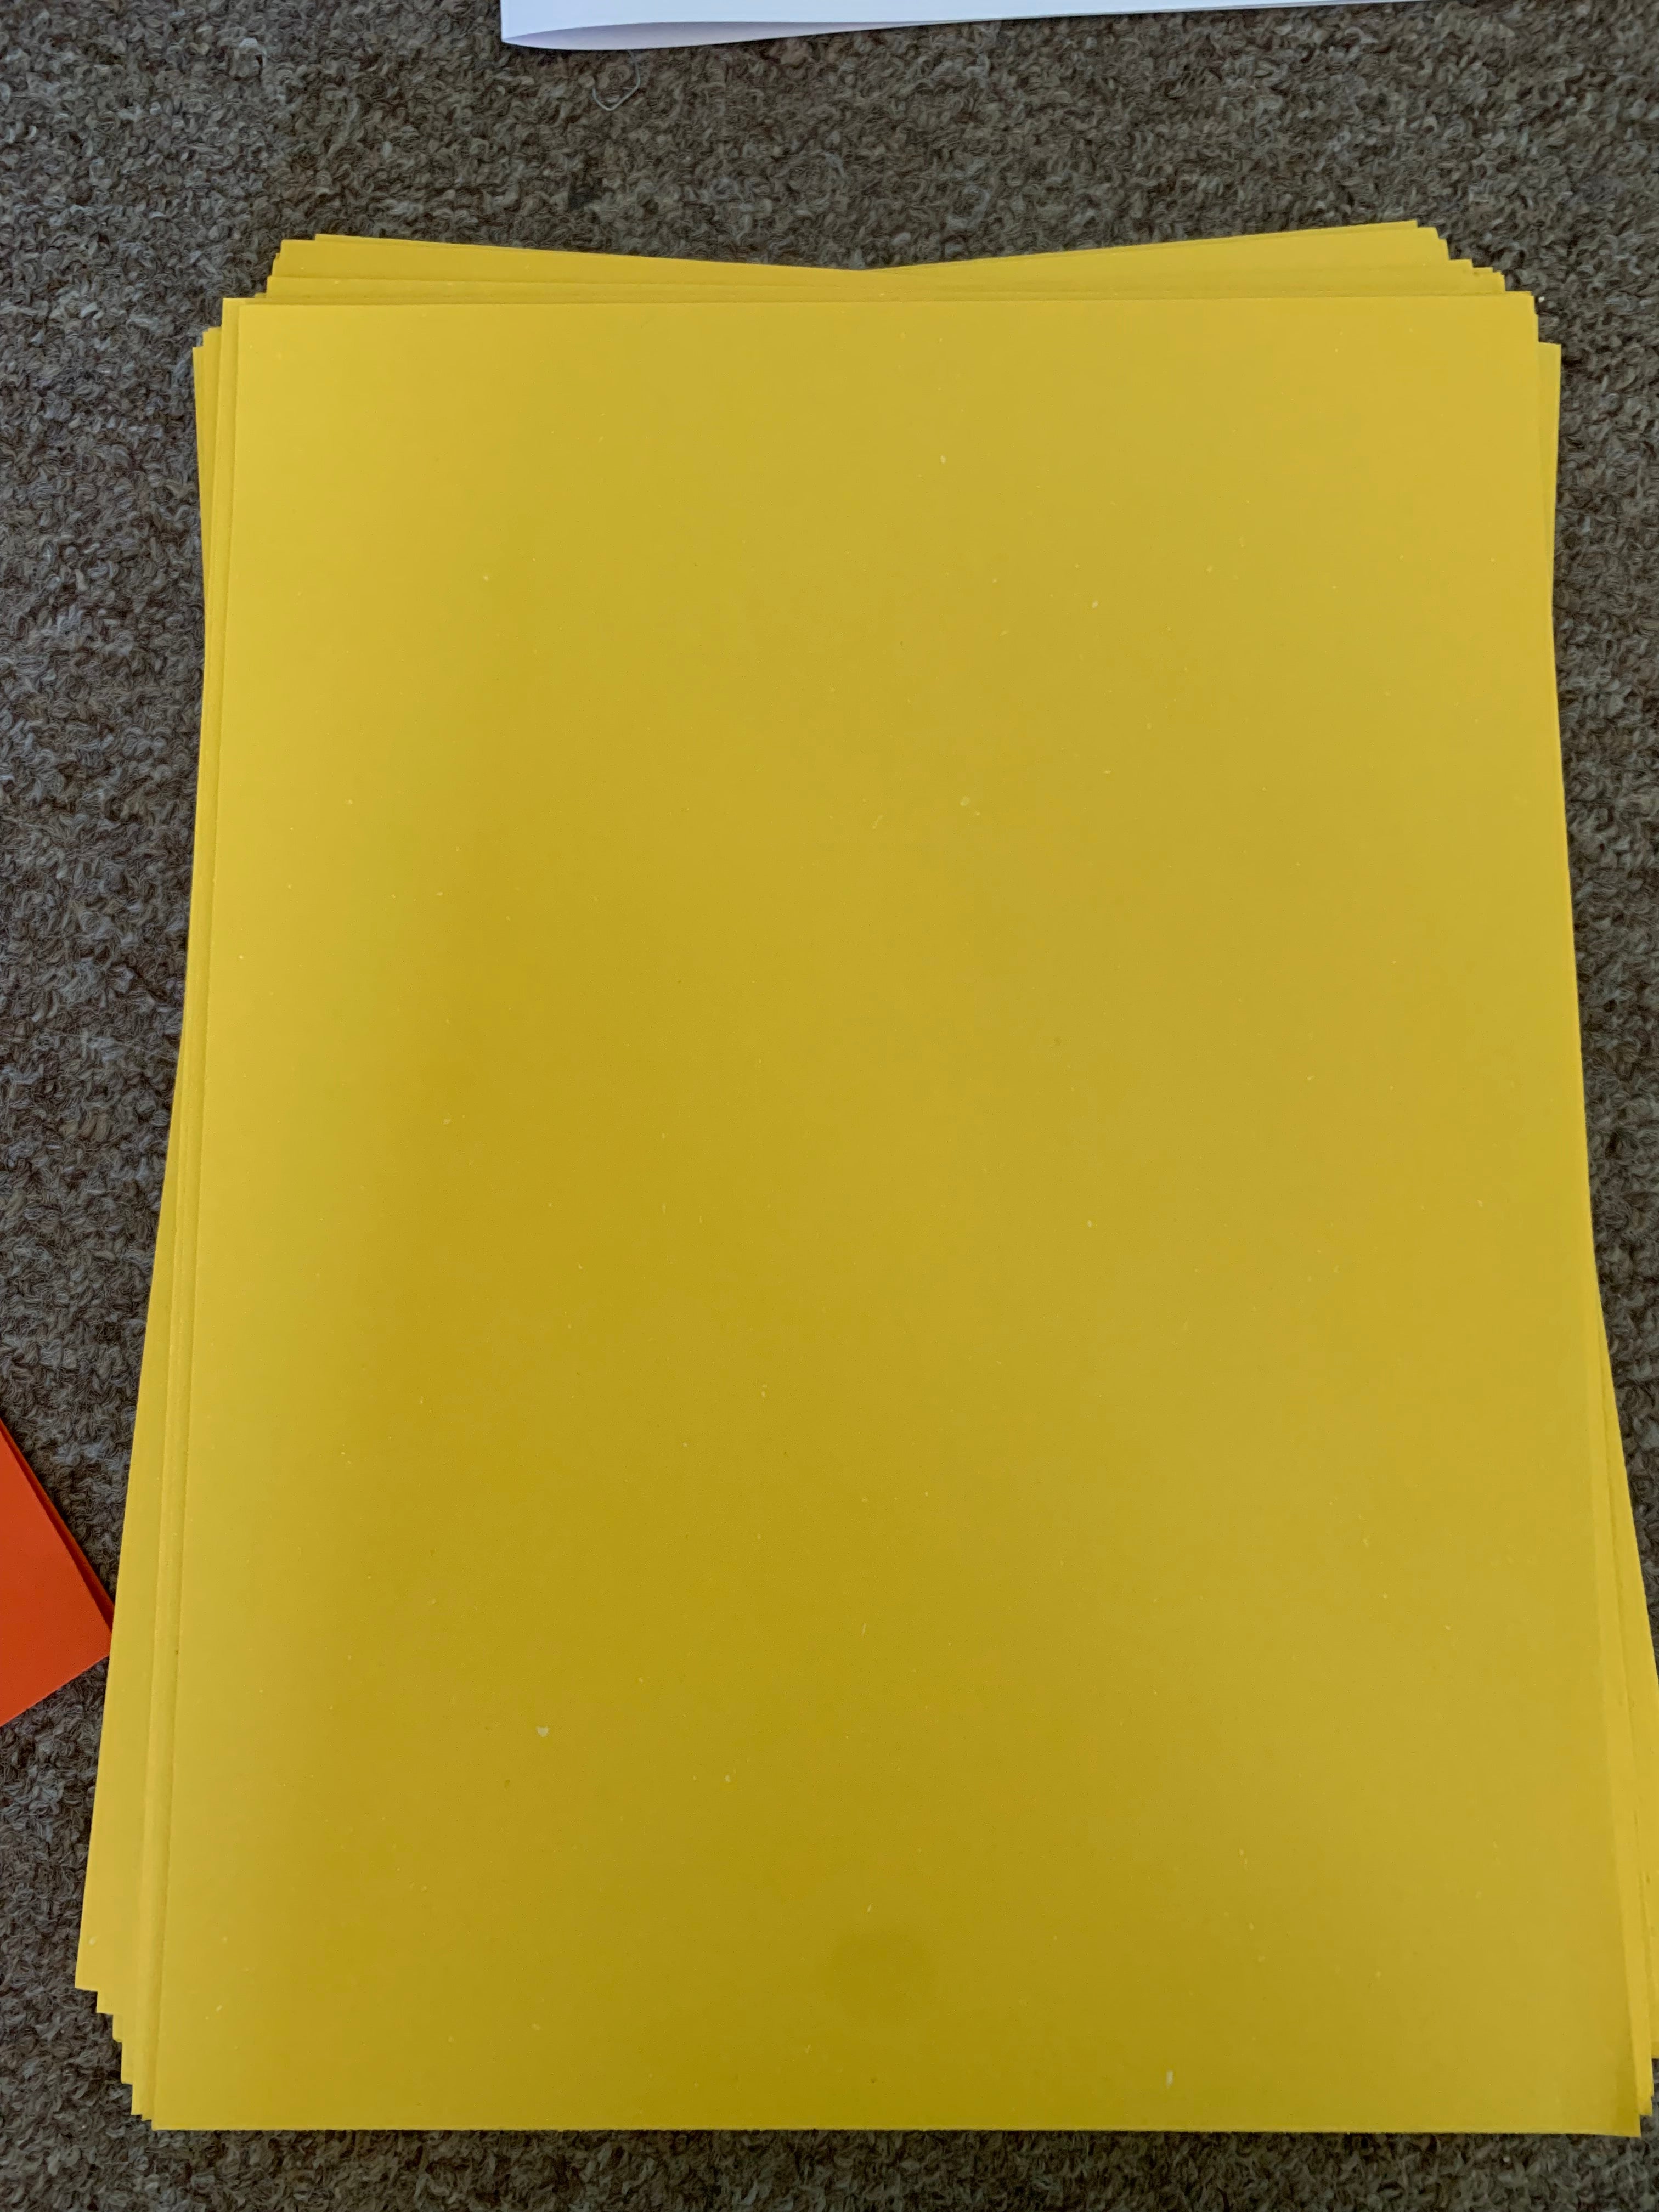 Yellow Construction Paper